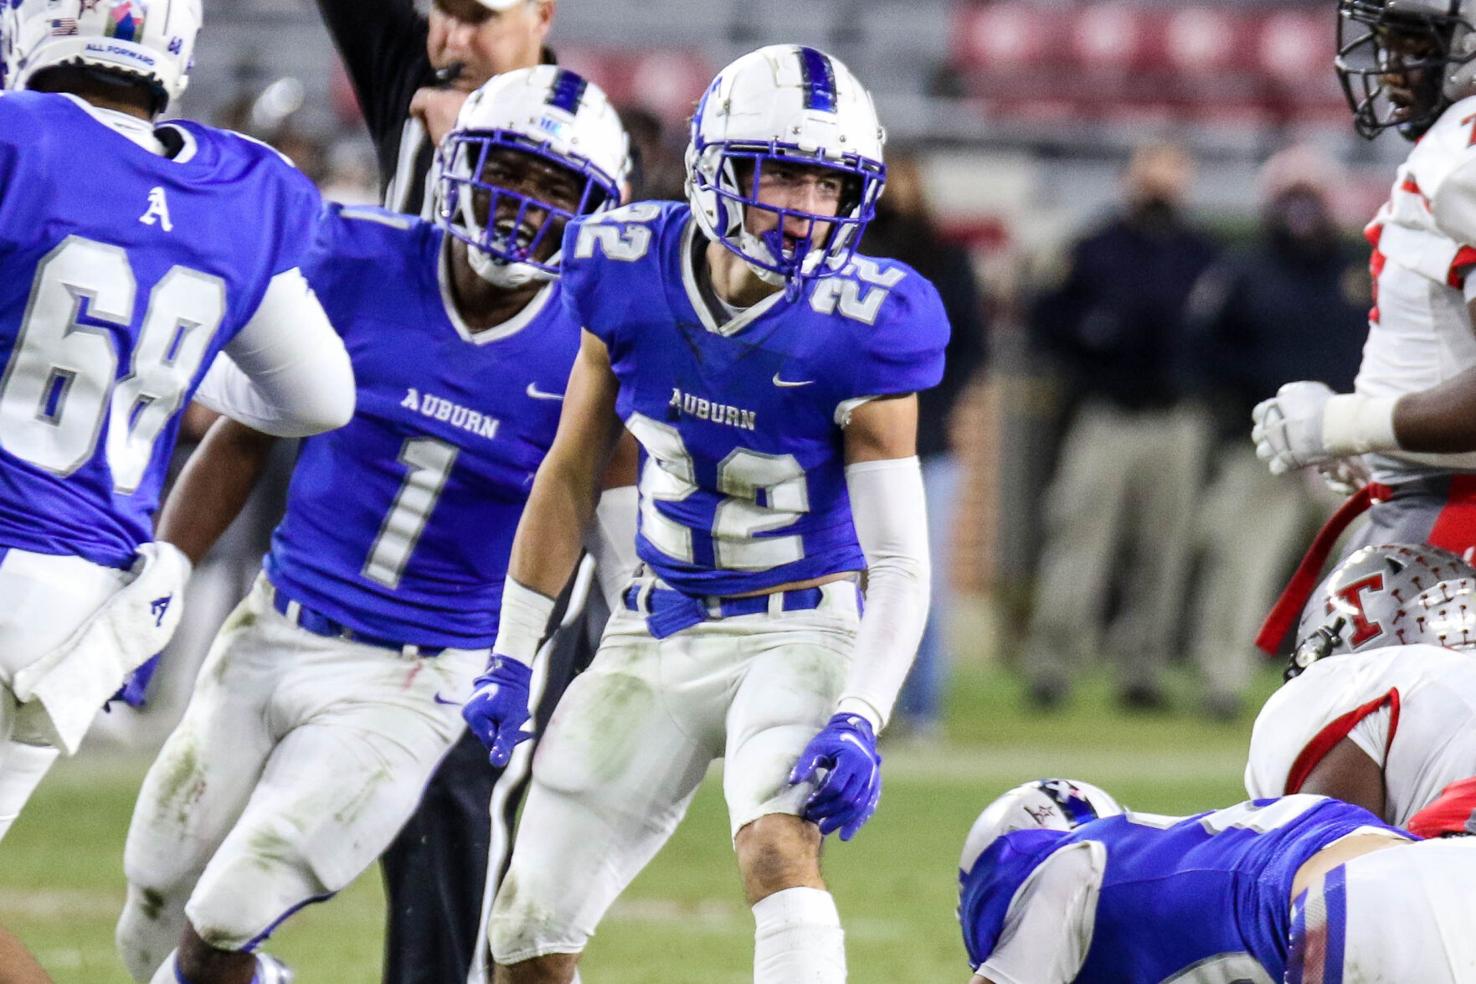 Watch now: Thompson's rally leaves Auburn High with title game loss | High School | oanow.com